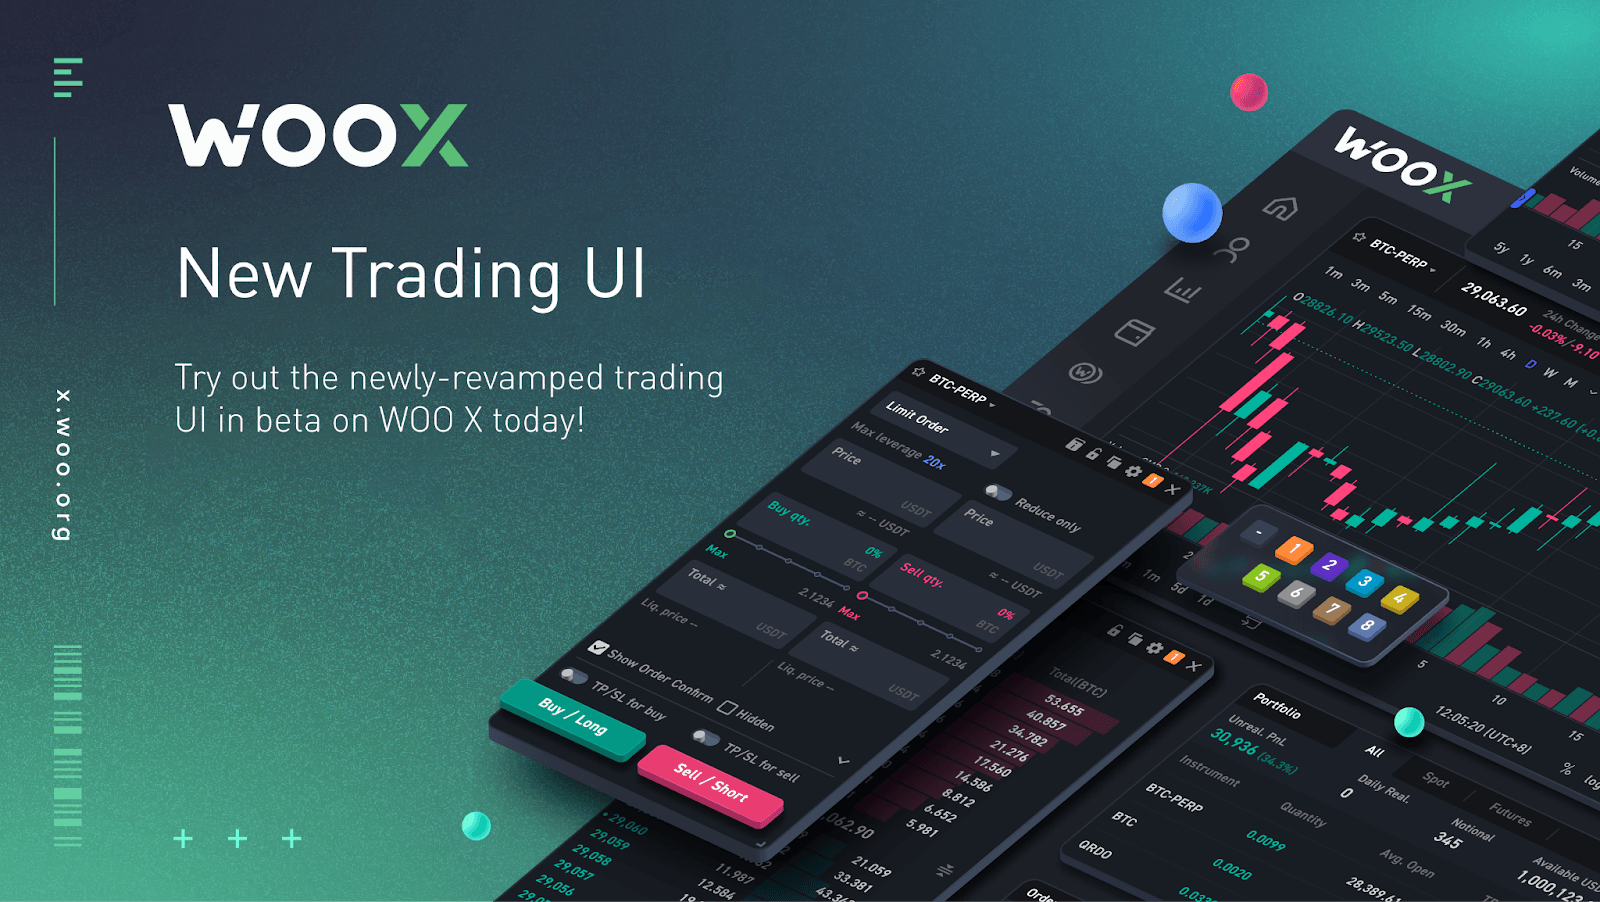 Revamped WOO X UI further enhances trading experience